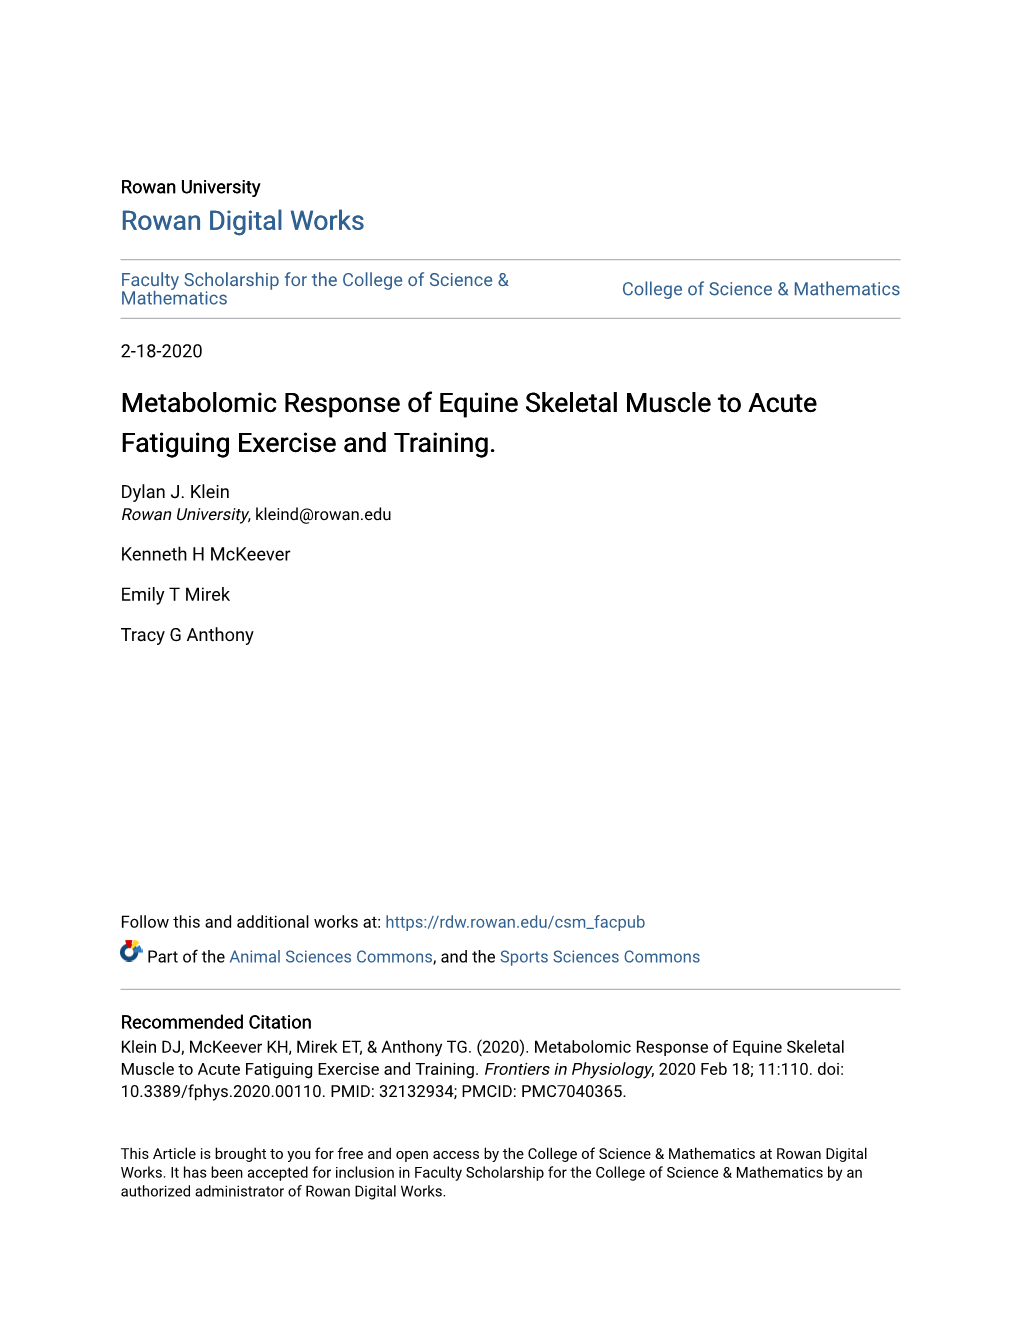 Metabolomic Response of Equine Skeletal Muscle to Acute Fatiguing Exercise and Training